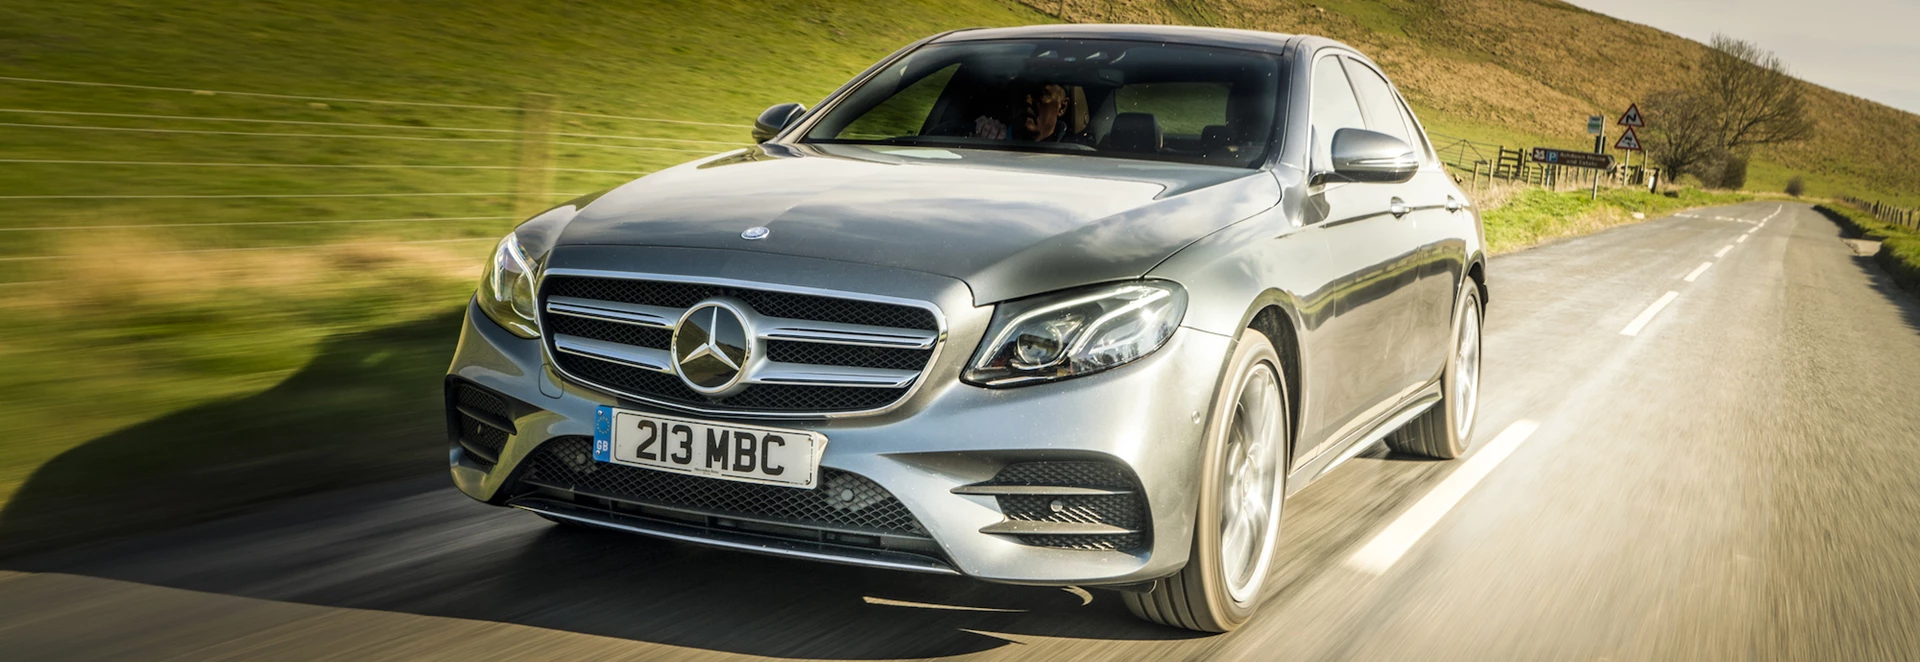 Mercedes launches new test drive programme